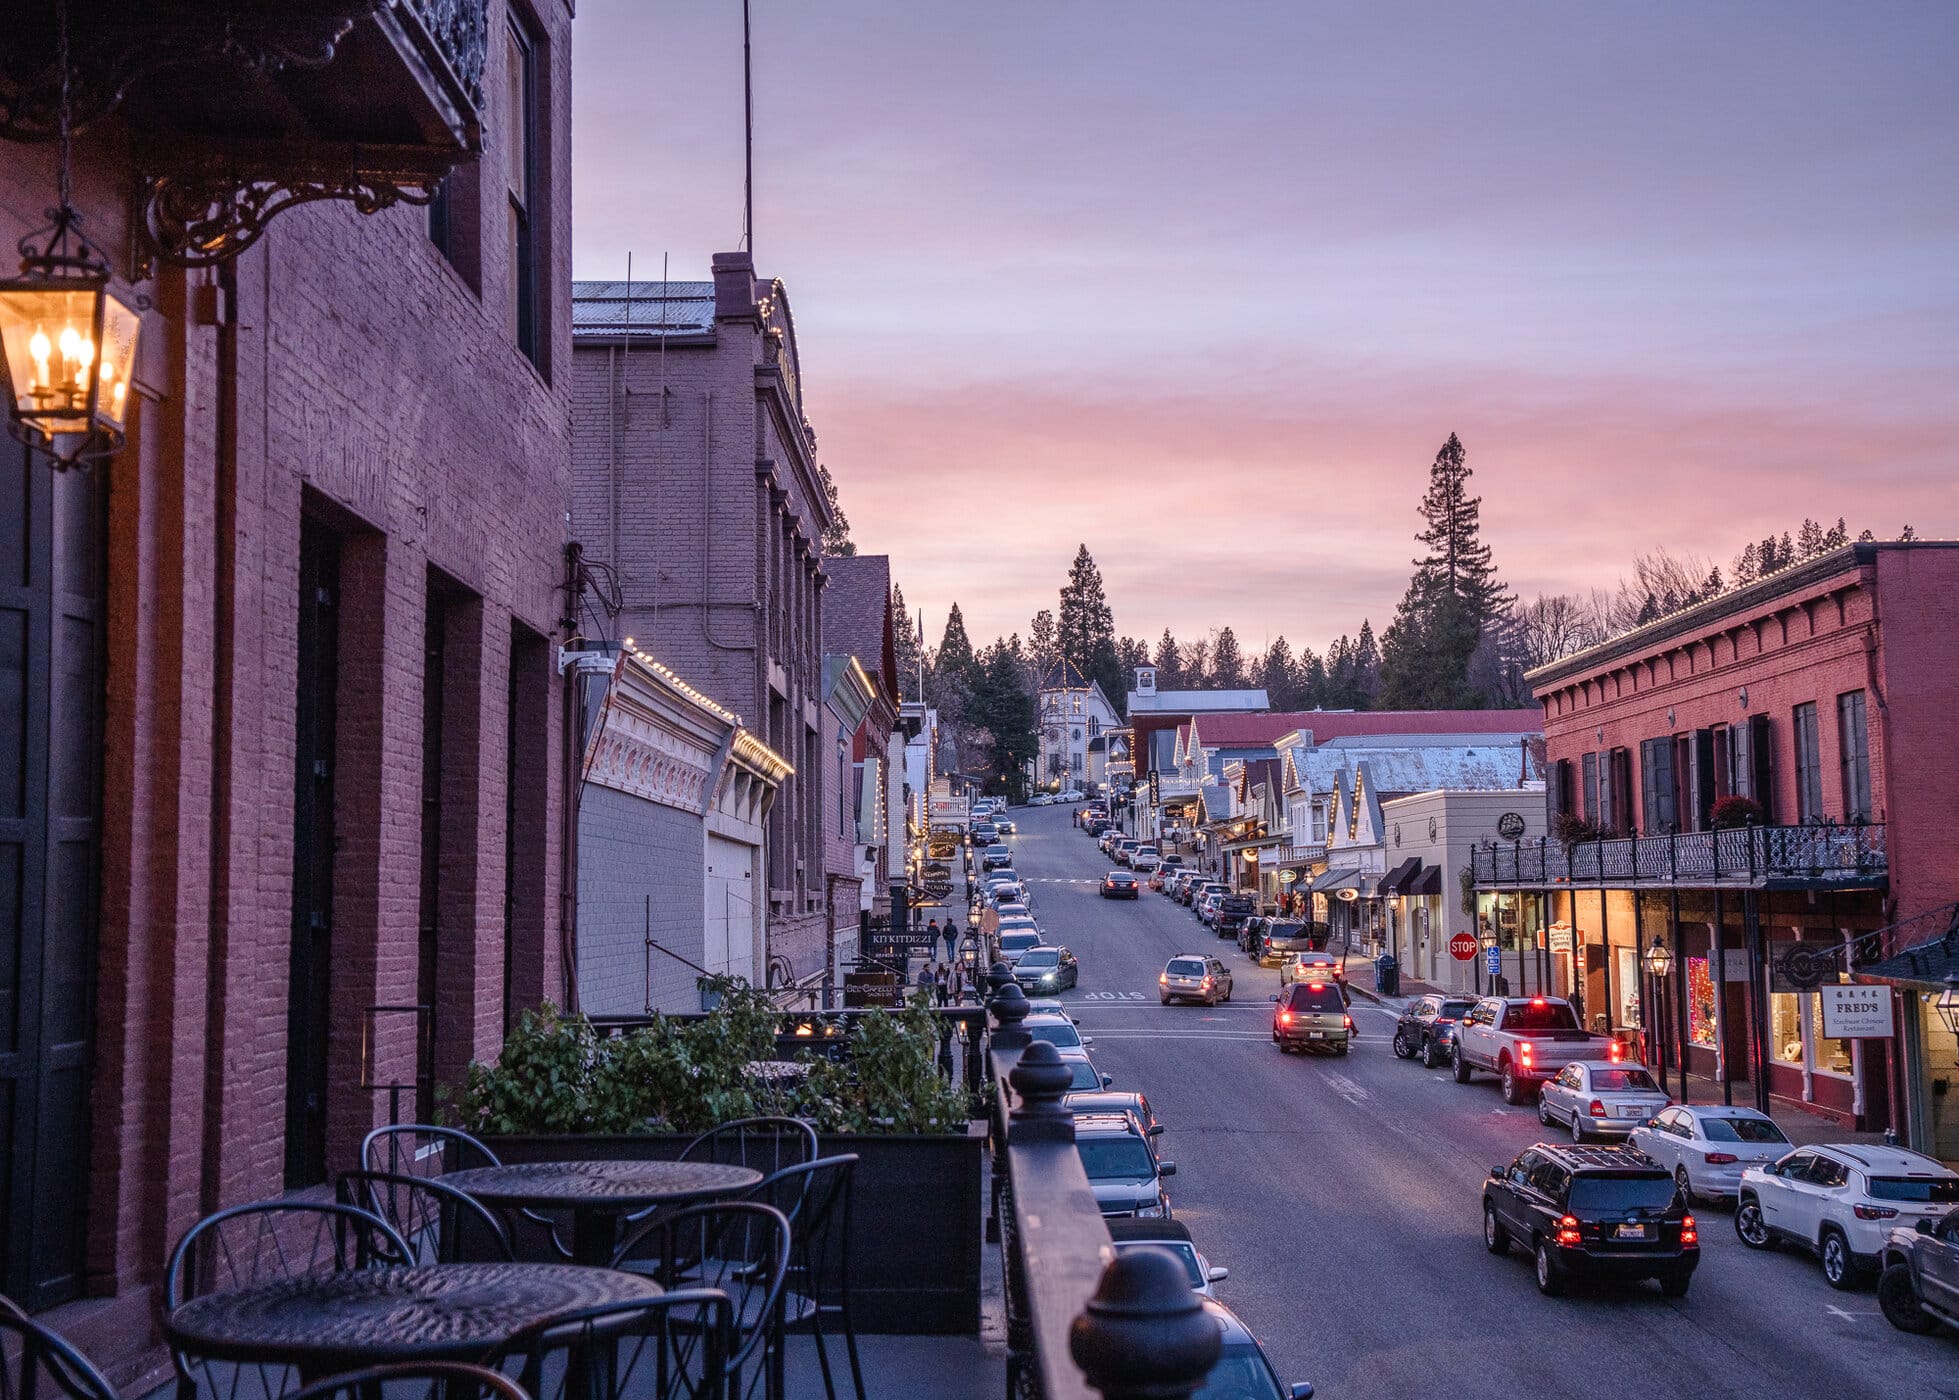 When you visit Big Spring, be sure to stop by Downtown Big Spring. There  are shops, restaurants, nightlife and entertainment. You can even stay in  the